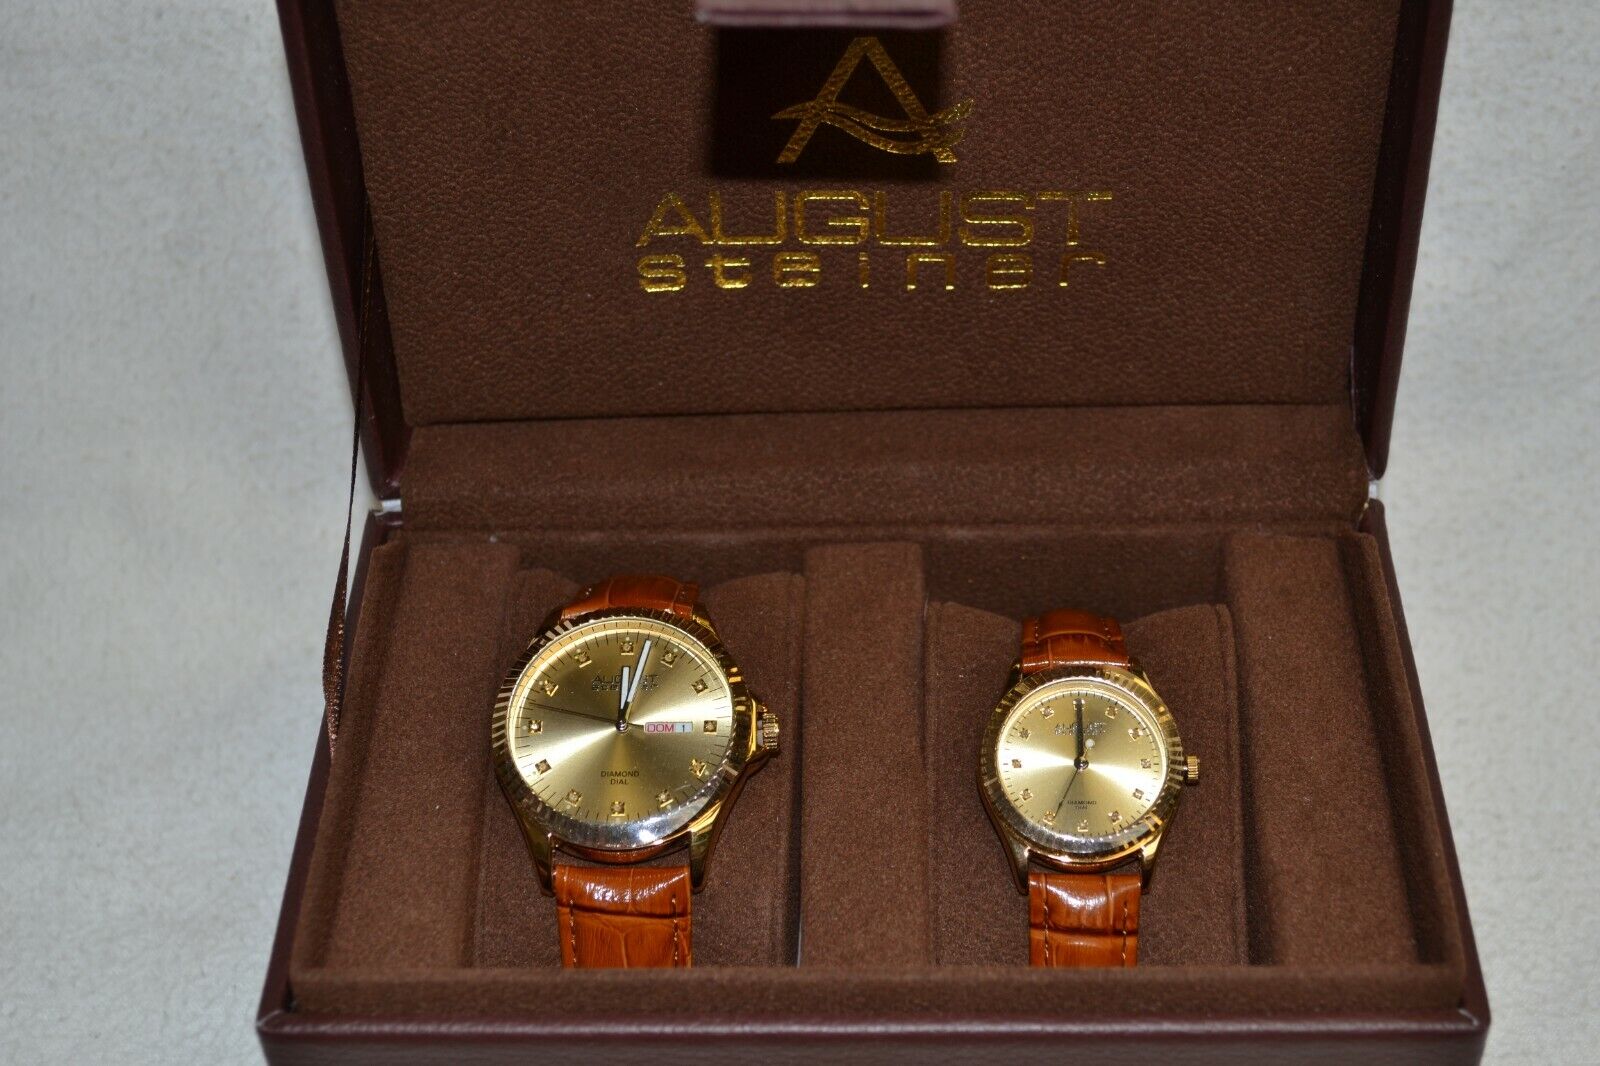 August Steiner AS8291YG His & Hers Quartz Gold Dial Leather Band Watch Set